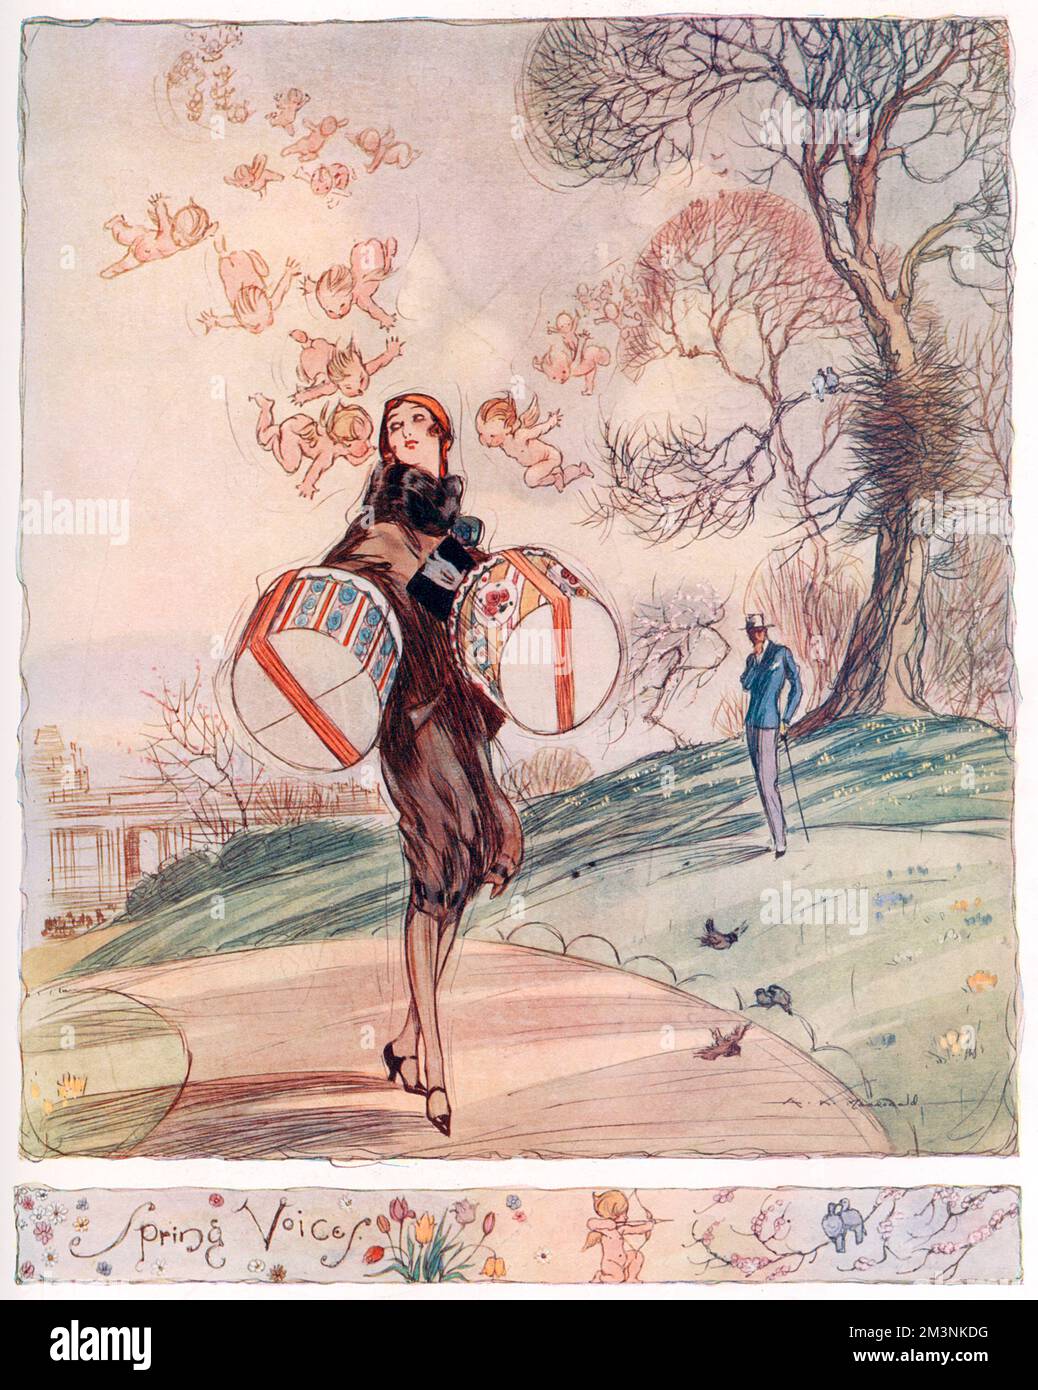 'Spring Voices' by A. K. Macdonald.     A glamorous young lady (taking a stroll through the park on her way home from a serious hat-purchasing spree) hears the voices of cupids telling her to turn her head, to make sure she does miss catching the eye of the tall, handsome gentleman, who stands hand on chin, appraising her every delicate step....     Date: late 18th century Stock Photo